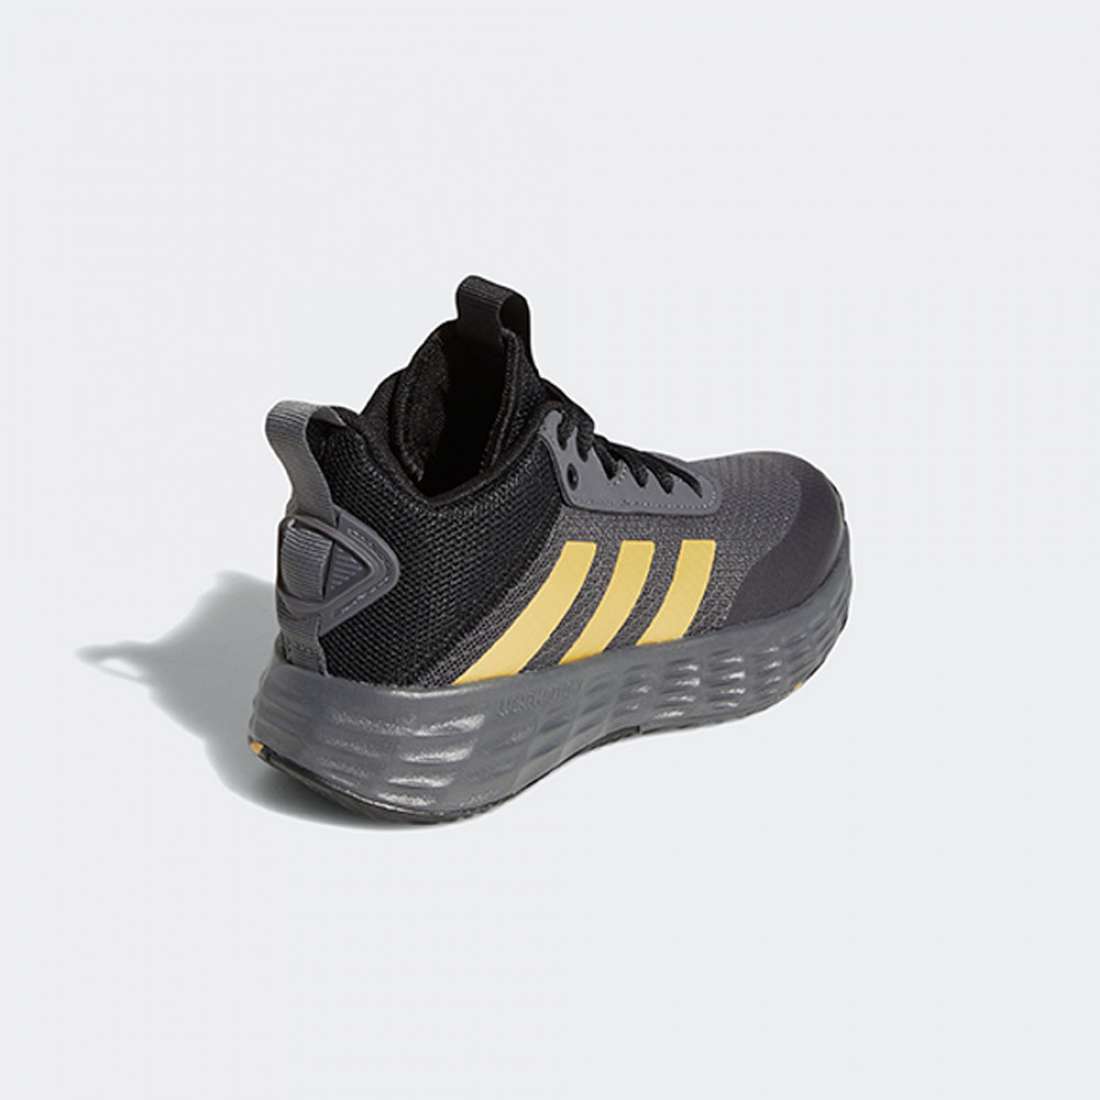 ADIDAS OWN THE GAME 2.0 GREFIV/MAGOLD/BLACK